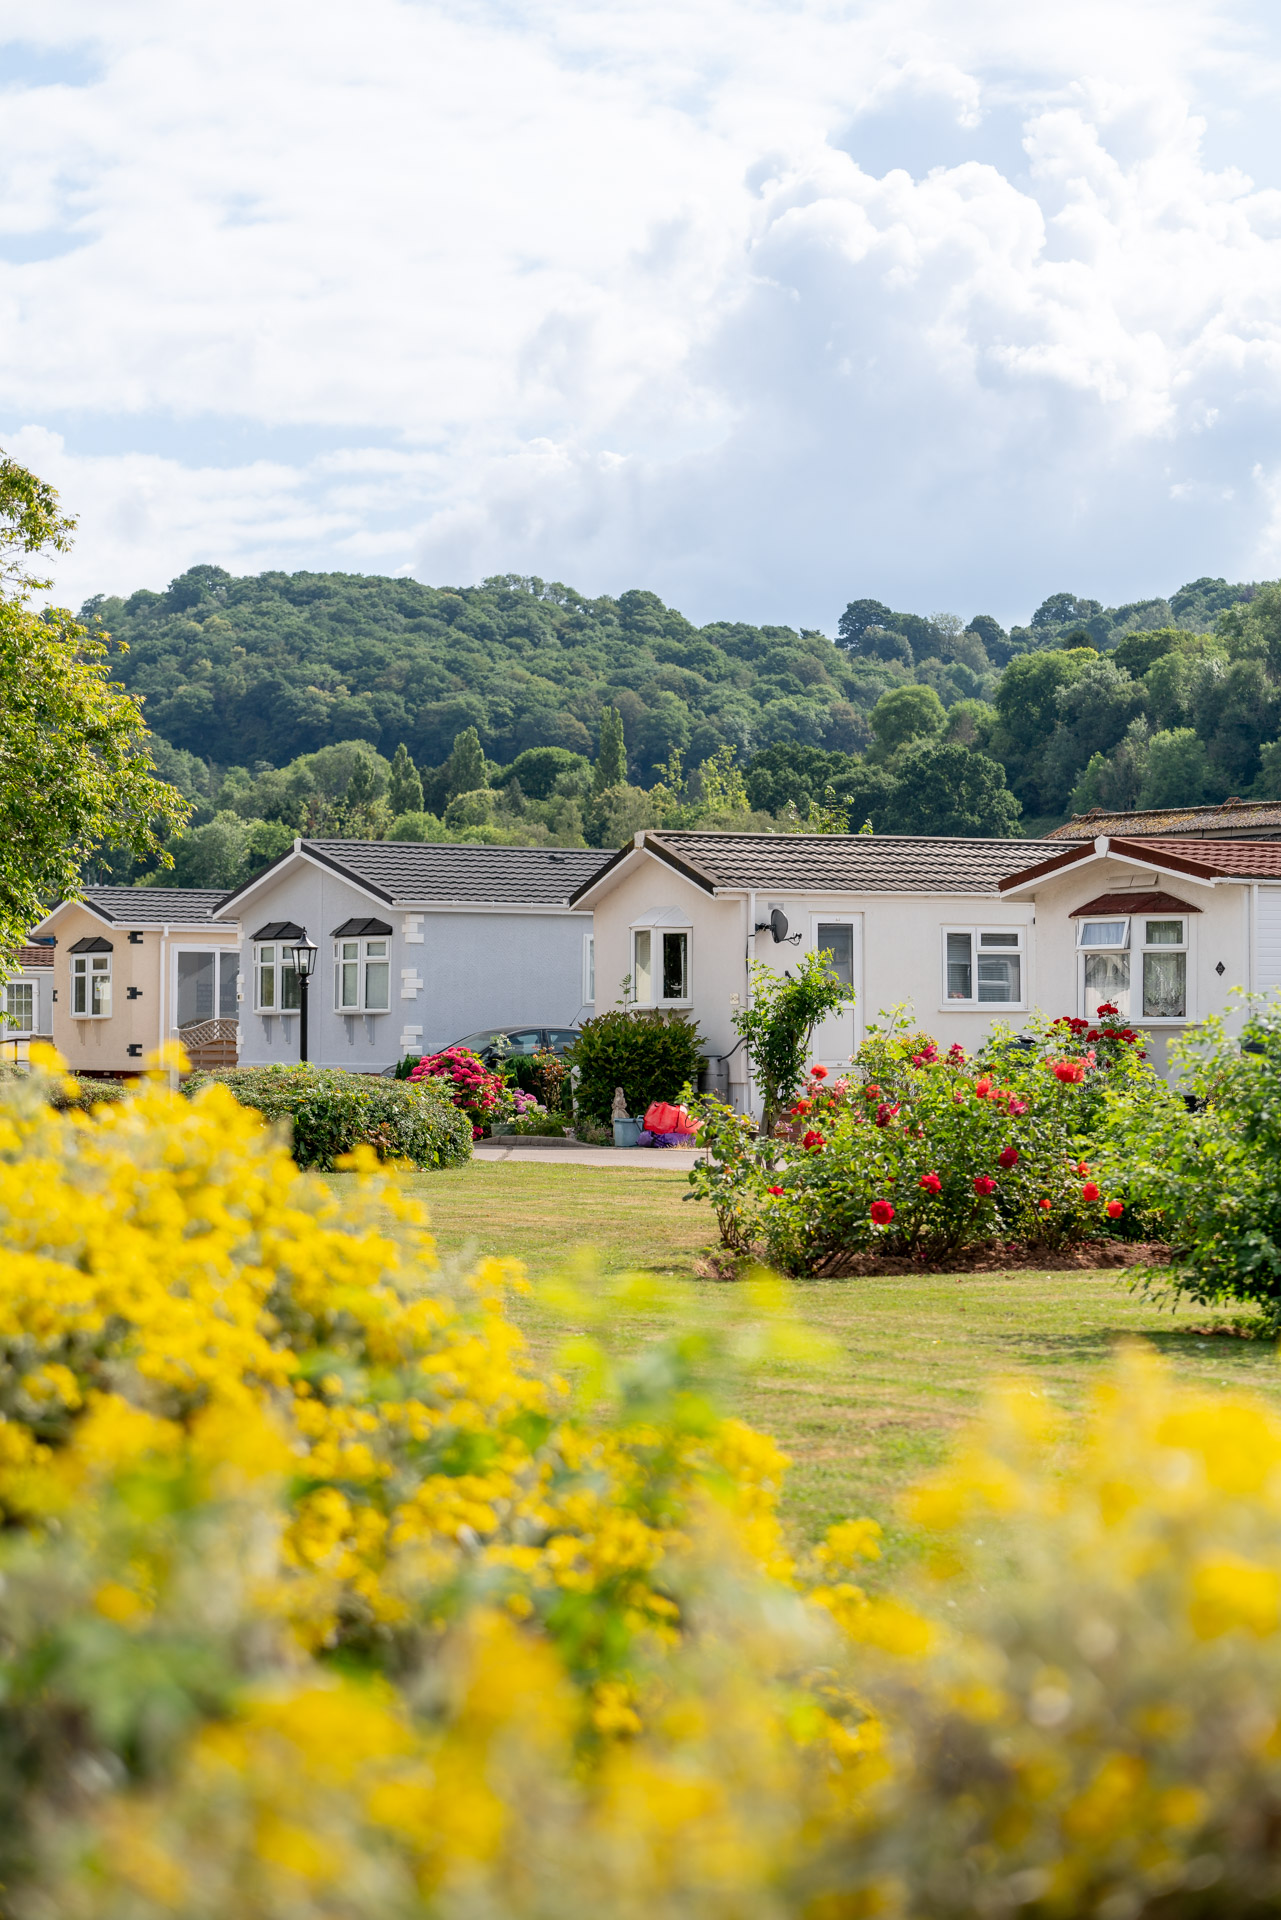 A Residential Haven on the Banks of the River Wye